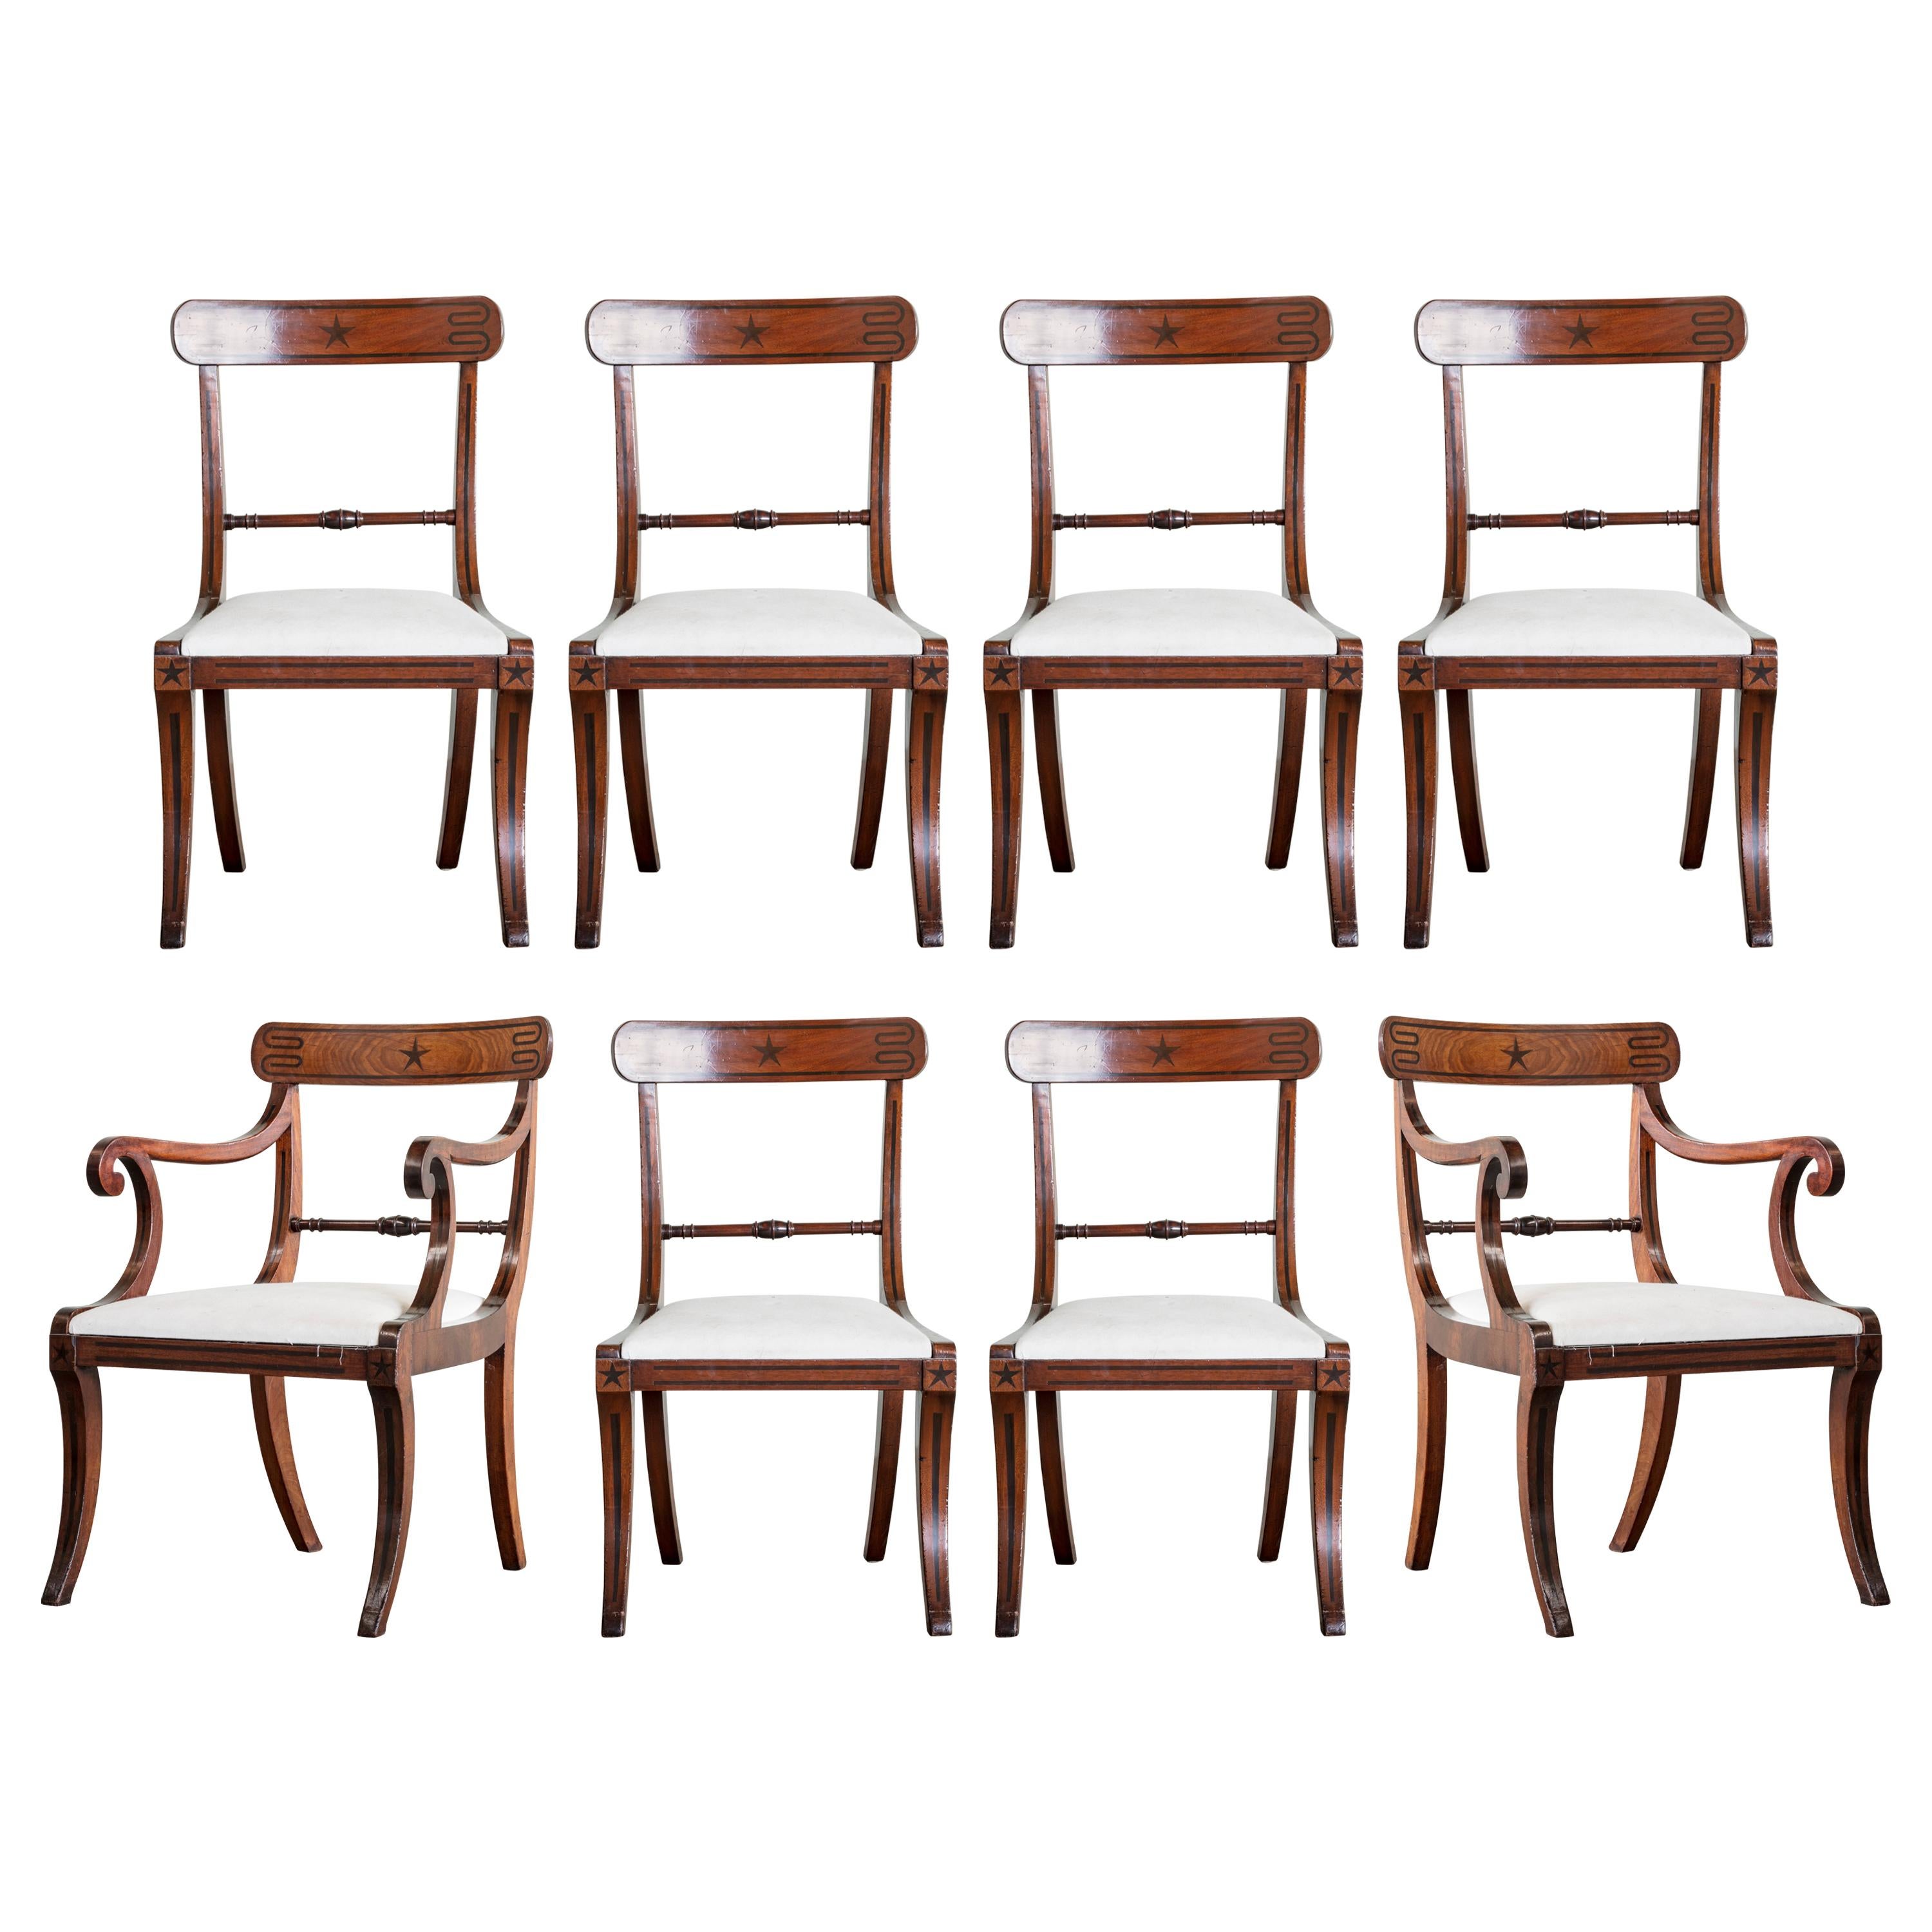 Set of Eight Regency Mahogany Dining Chairs, Including a Pair of Elbow Chairs